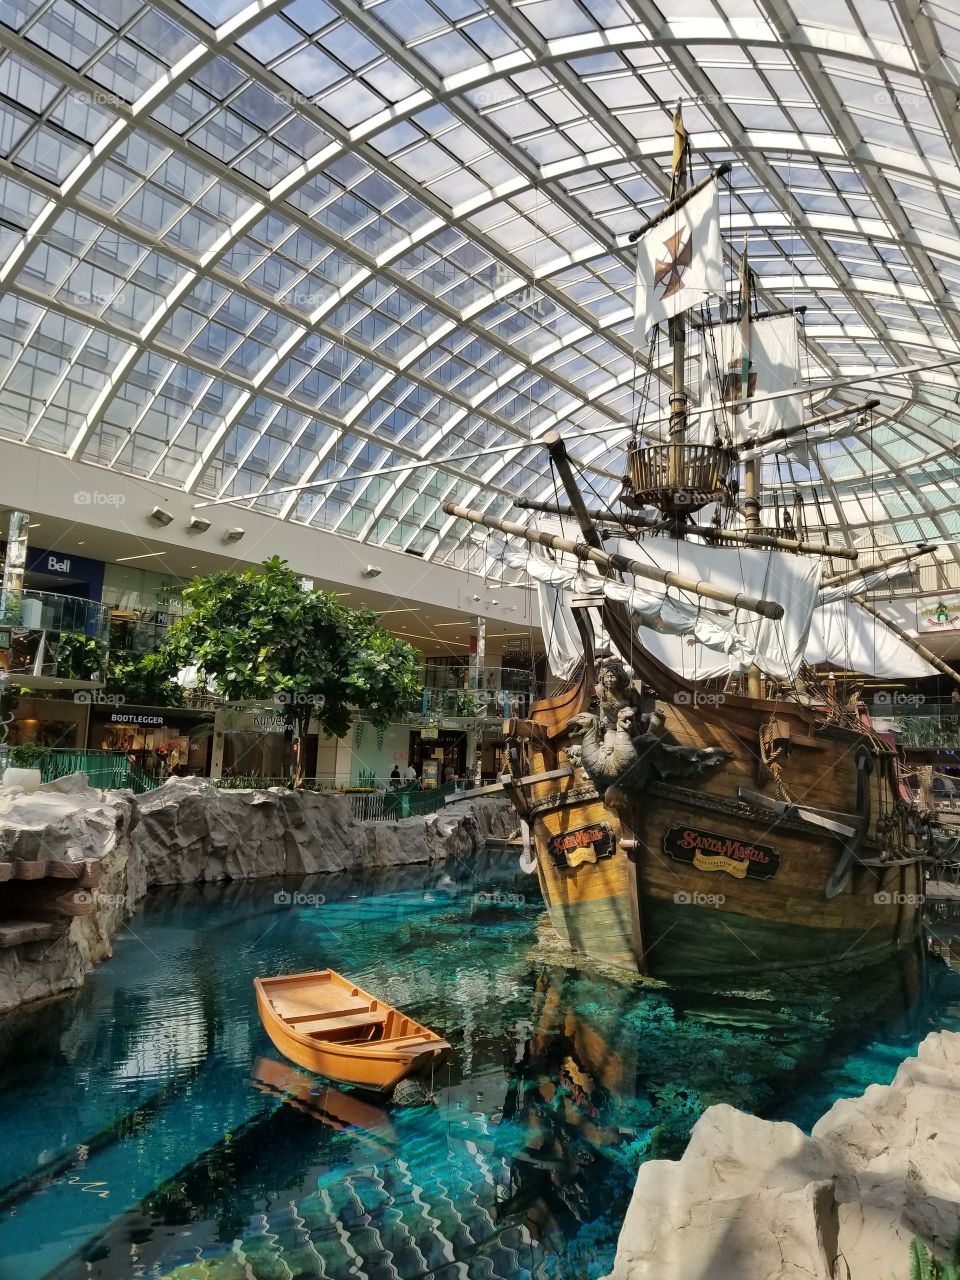 the famous west Edmonton mall pirate ship